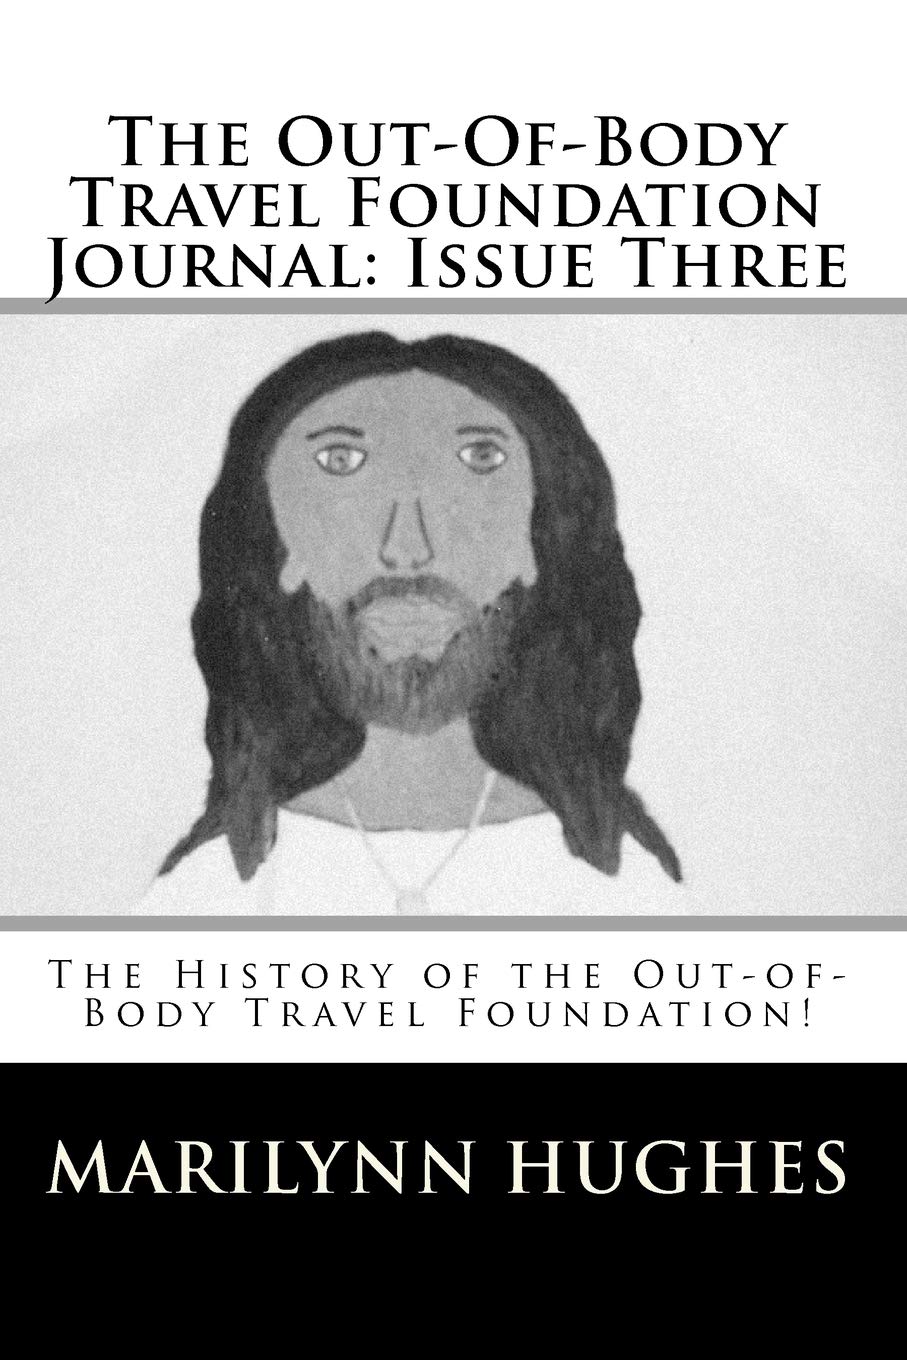 The History of the Out-of-Body Travel Foundation, By Marilynn Hughes